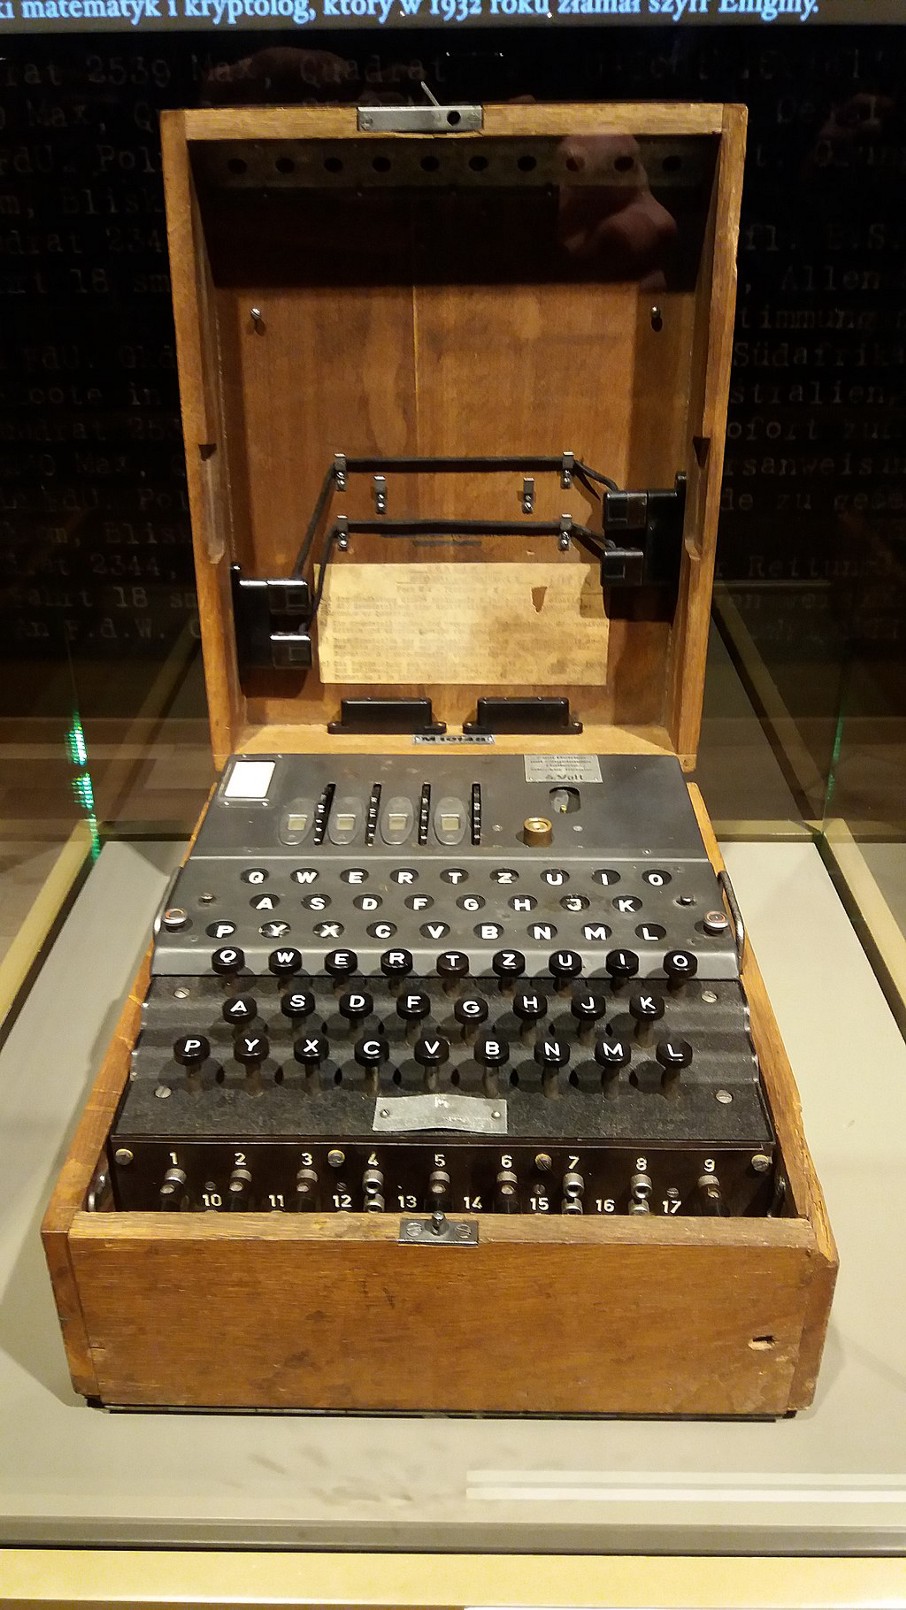 End of an era: the Enigma machine